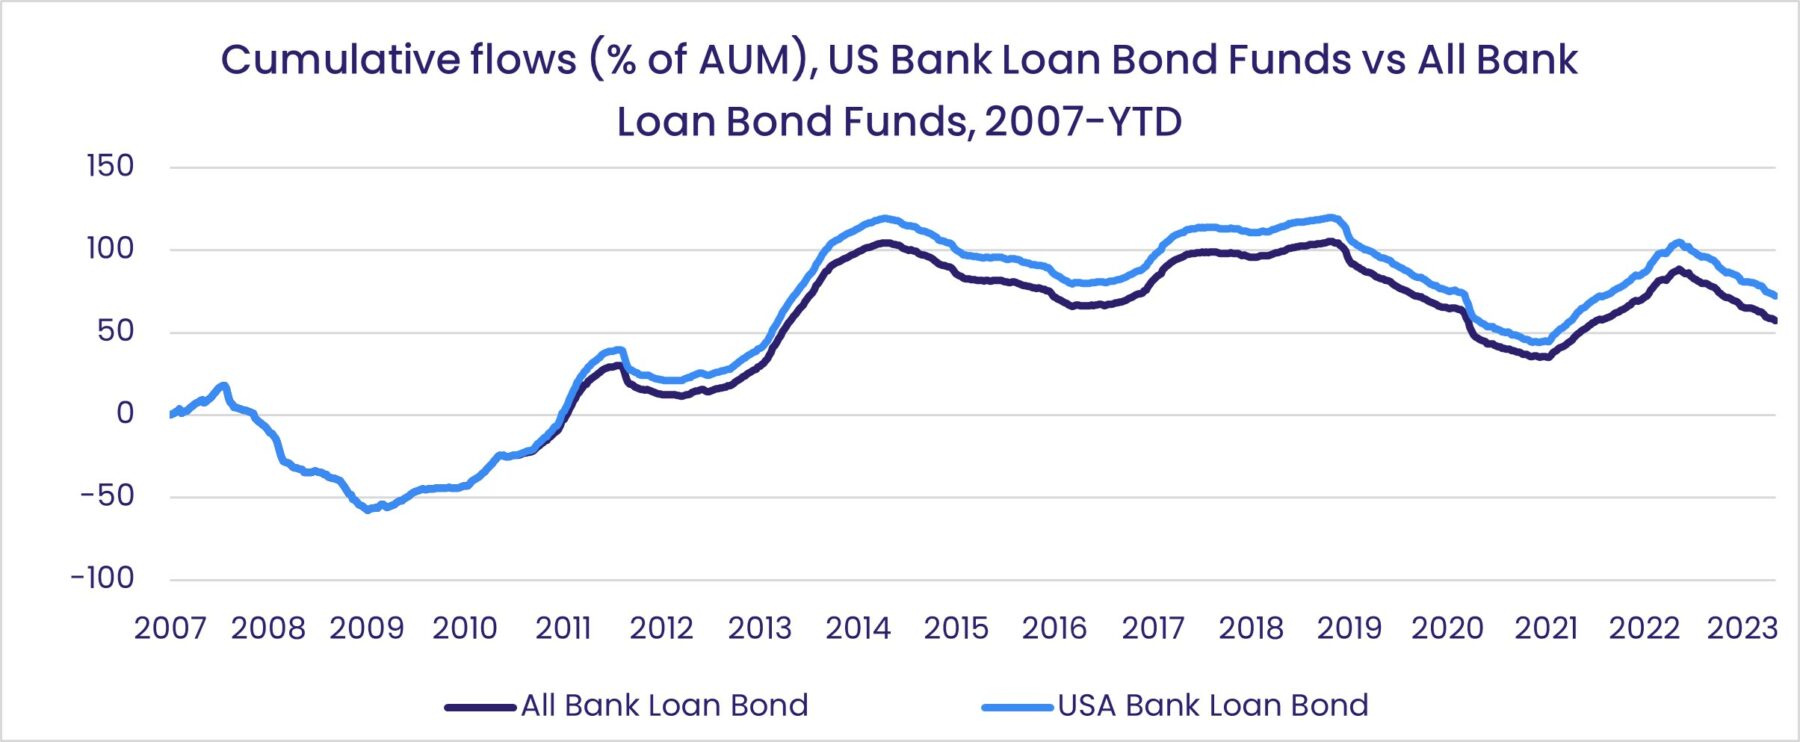 Image of a chart representing "Cumulative flows (% of AUM), US Bank Loan Bond Funds vs All Bank Loan Bond Funds, 2007-YTD"